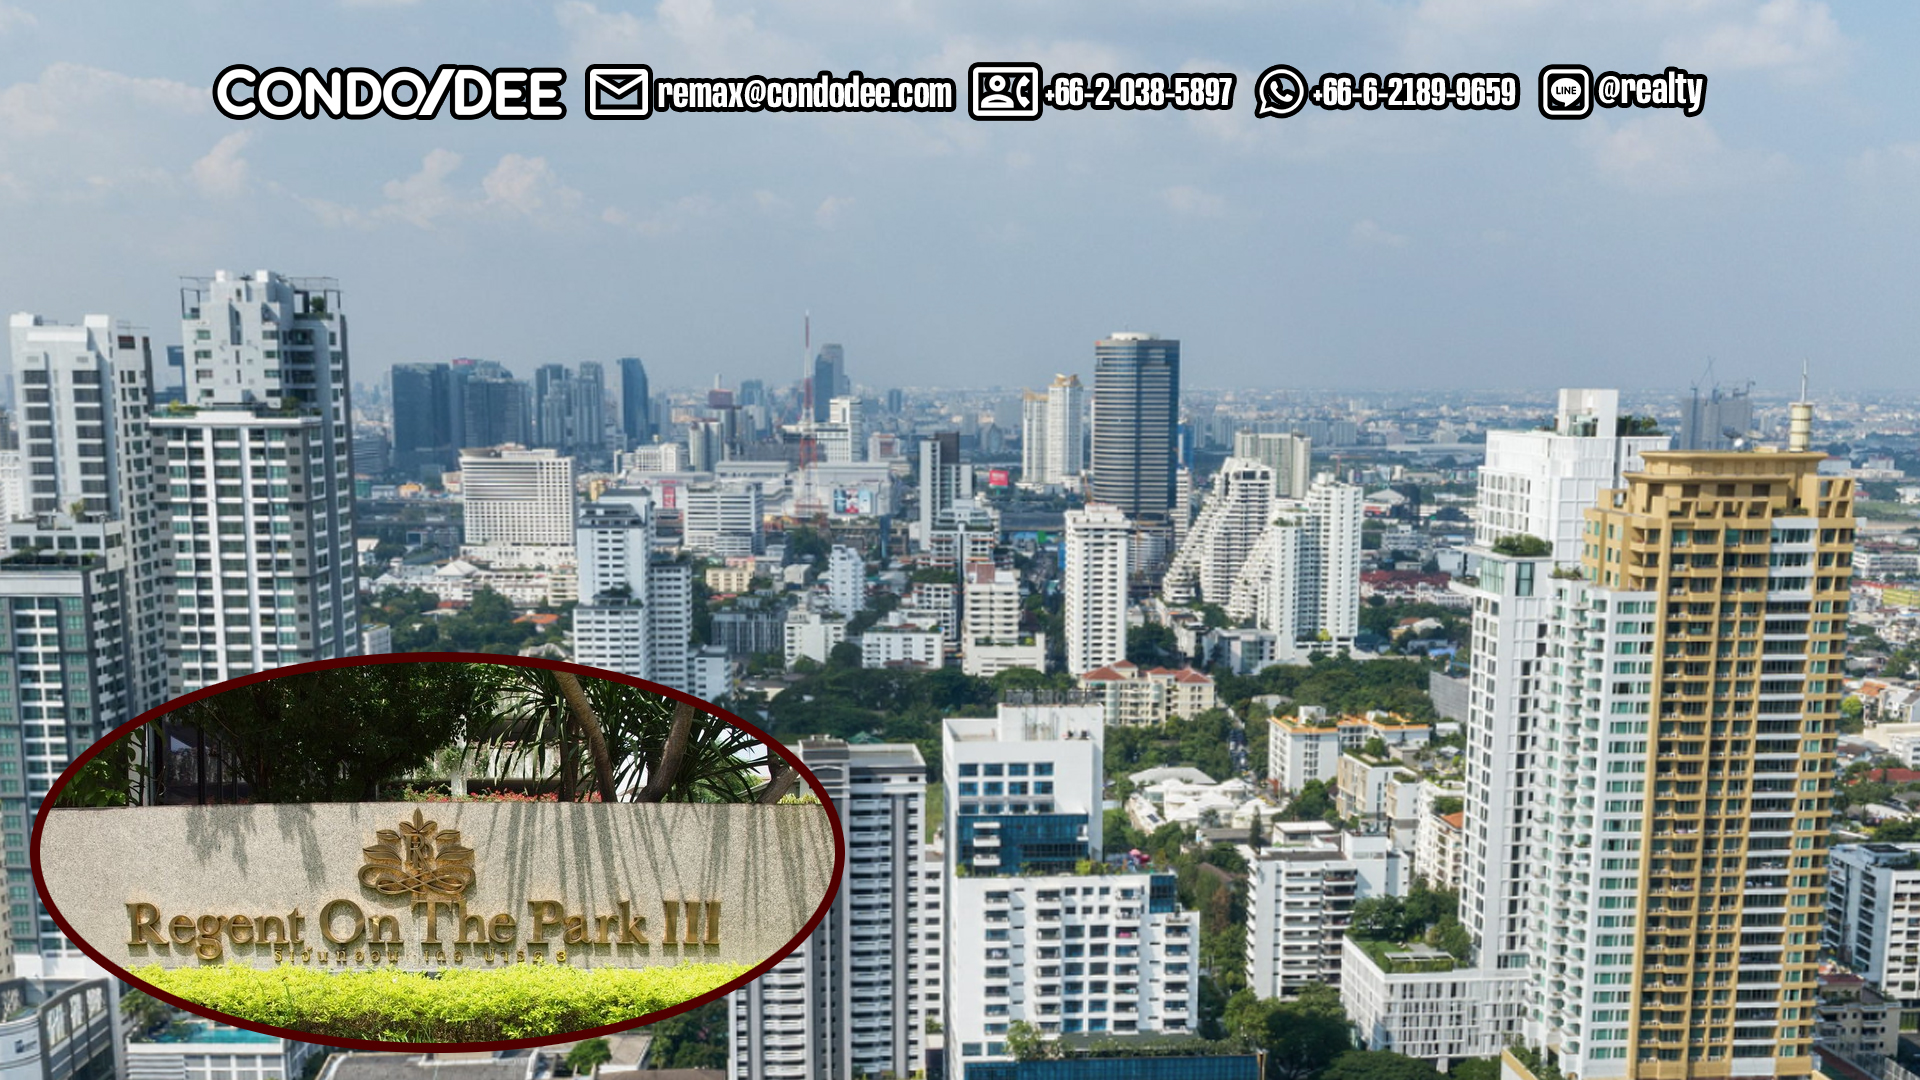 Regent on the Park 3 Sukhumvit 39 condo for sale in Phrom Phong in Bangkok was built in 1995.